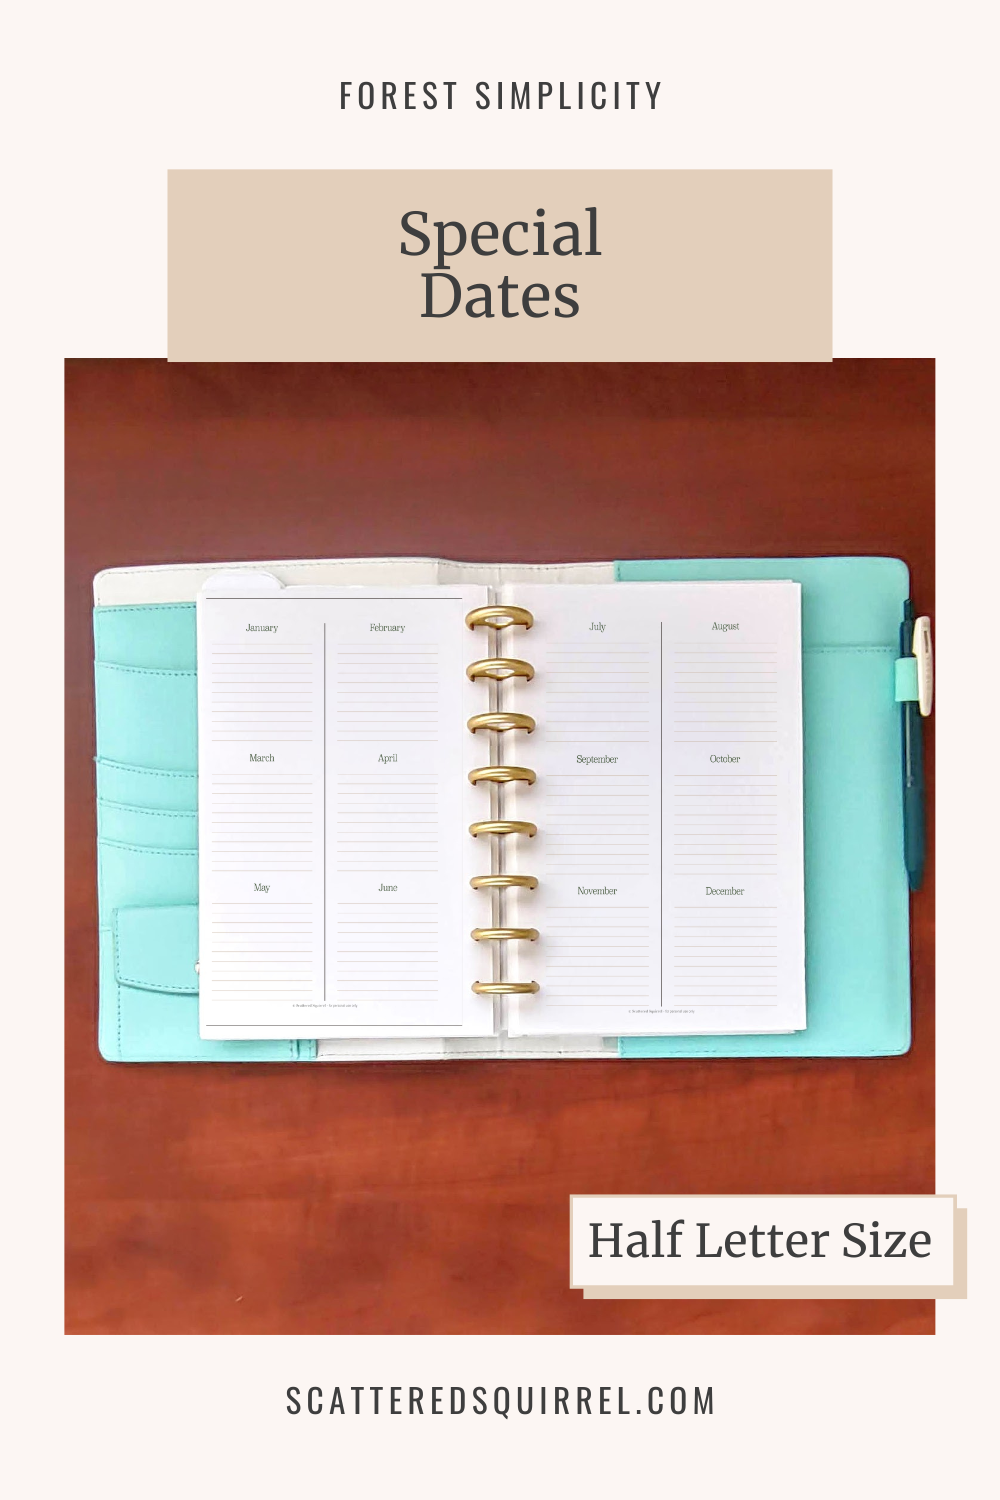 Image says "Forest Simplicity - Special Dates" at the top. Underneath is a picture of a white and teal planner lying open on a wooden desk. The pages are each divided into two columns with three sections in each column. Each section is labeled with a month and under is a series of lines. This image links to the Half Letter Size Special Dates PDF that can be downloaded.